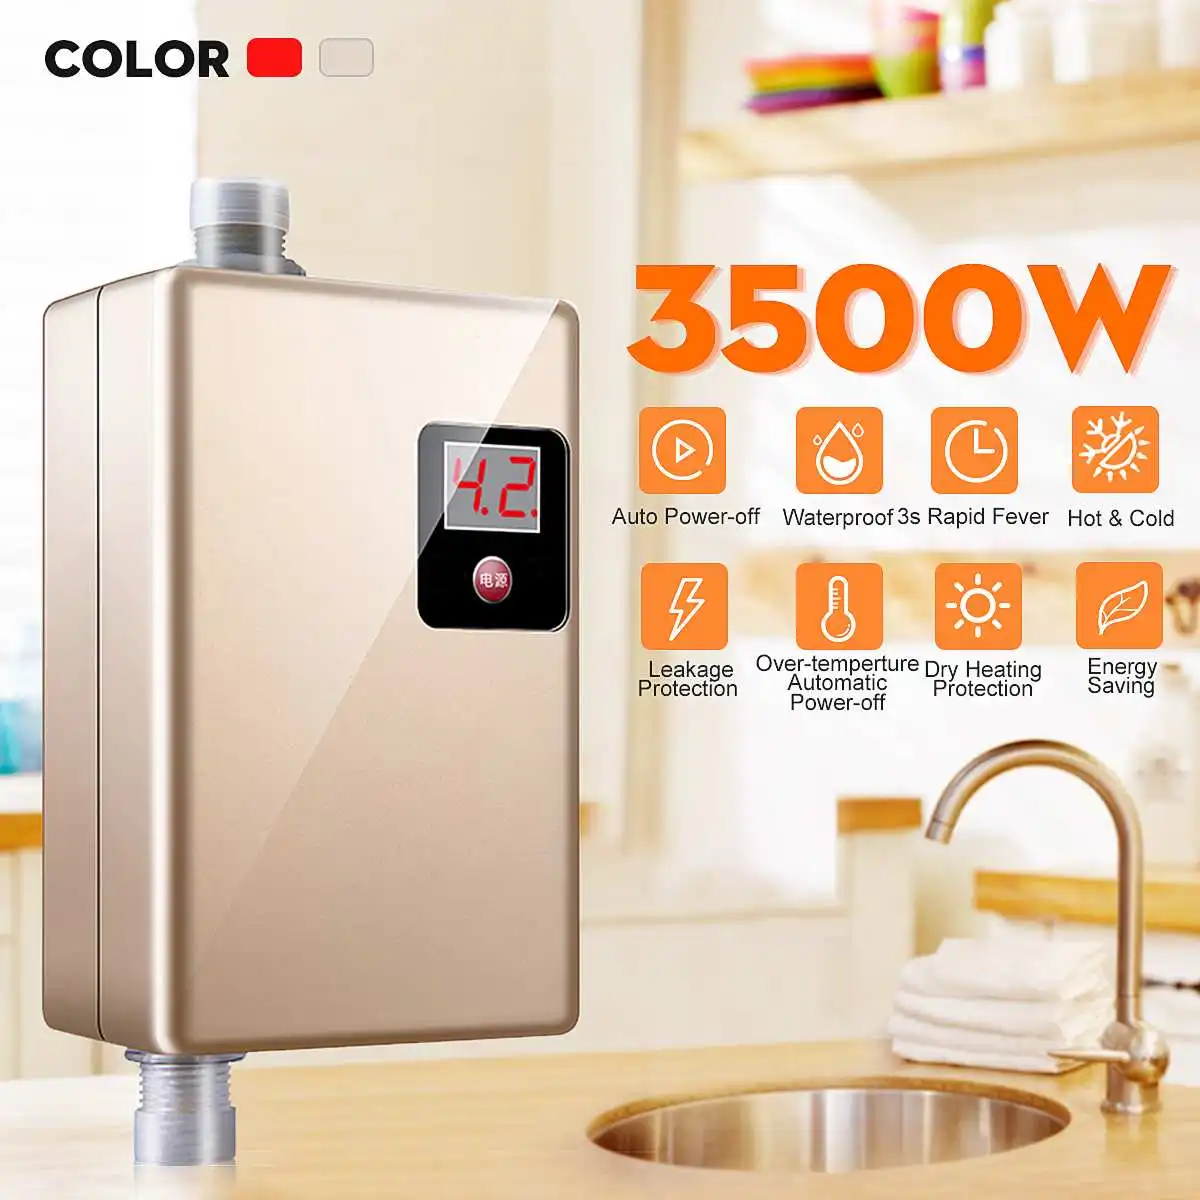 

Fast Hot 220V 3500W Mini Electric Tankless Instant Hot Water Heater Kitchen Faucet Tap Heating Instantaneous Waterproof Shower